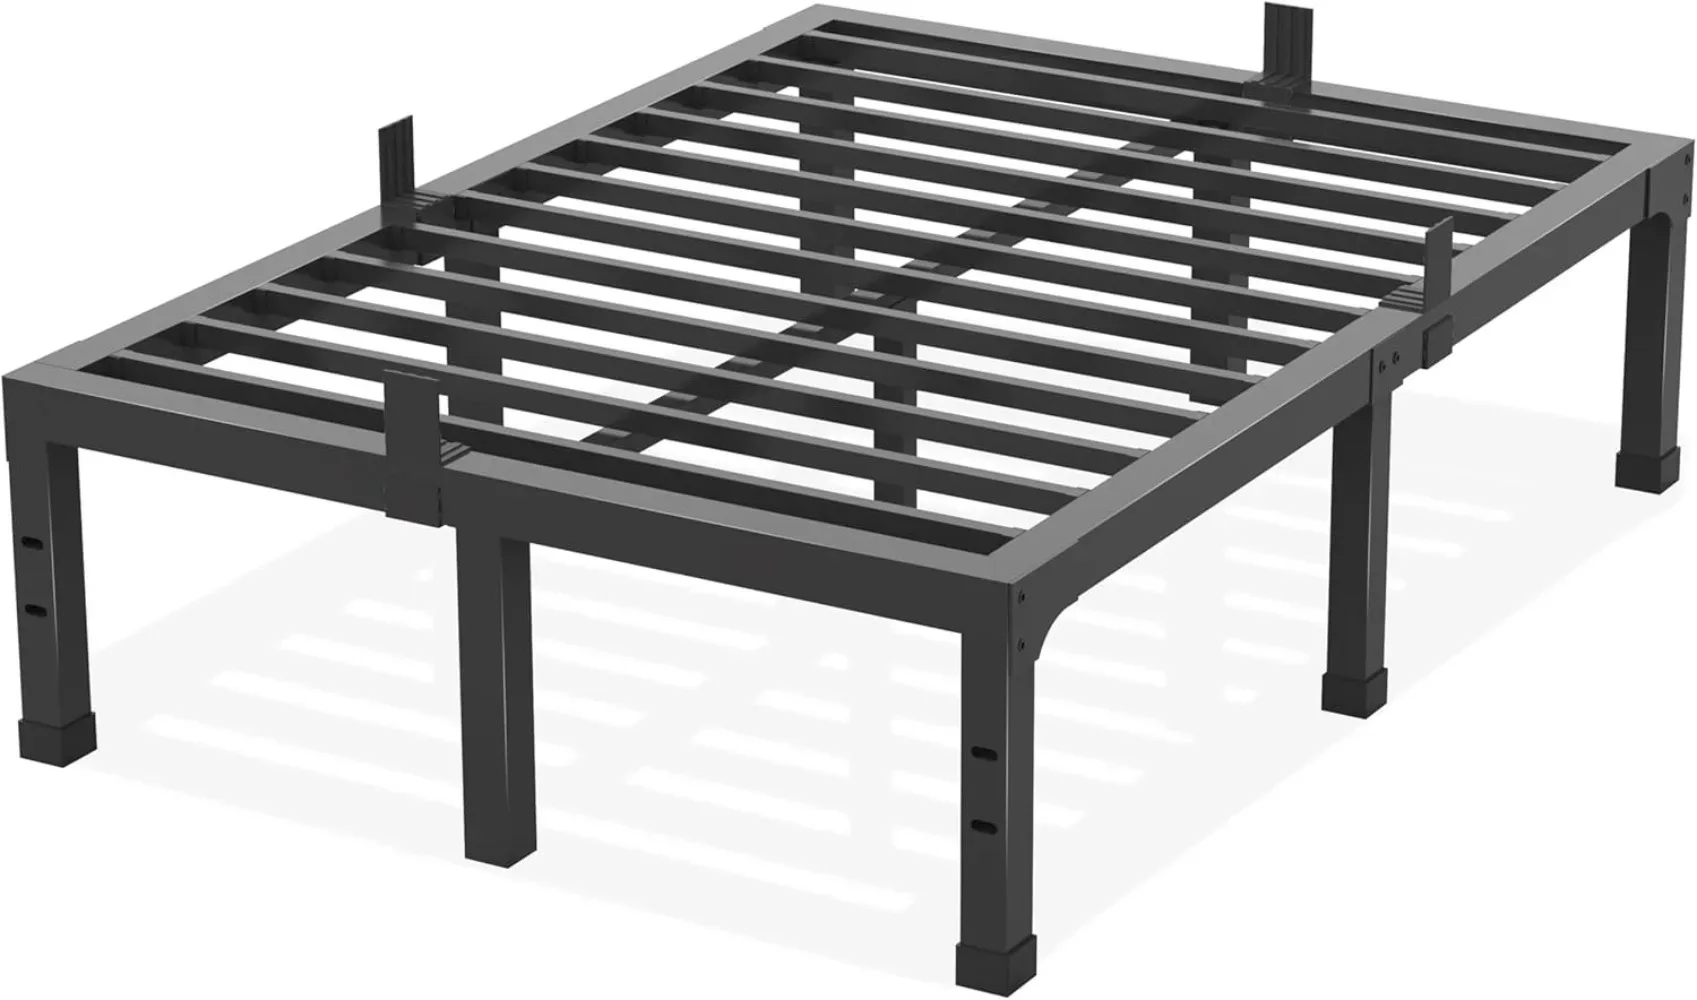 

King Bed Frame,14 Inch High 3500 Lbs Metal Platform, Mattress Foundation with Steel Slat Support/No Box Spring Needed/Noise Free